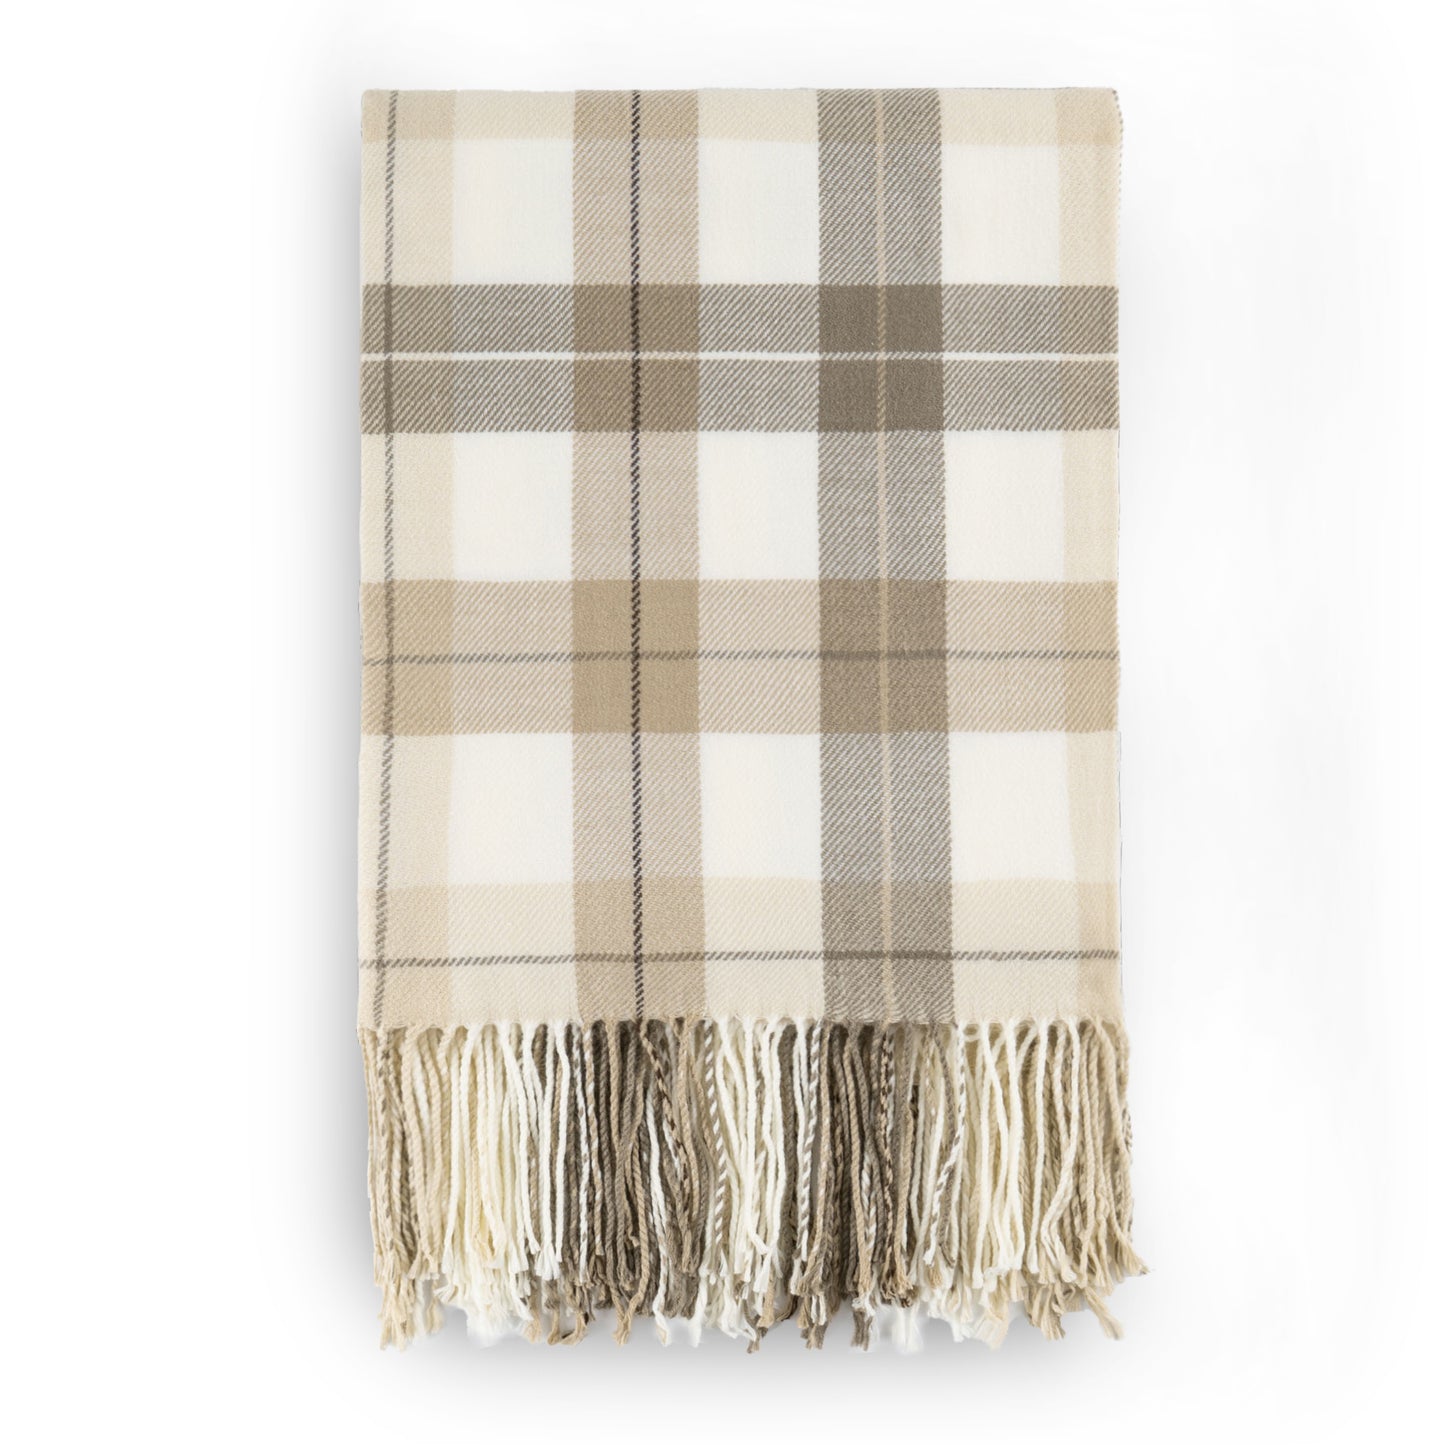 Buffalo Plaid  for Couch  Soft Woven Blanket with Decorative Fringe  Throw Blanket for Bed, Sofa Office BTL17113- Grey&White